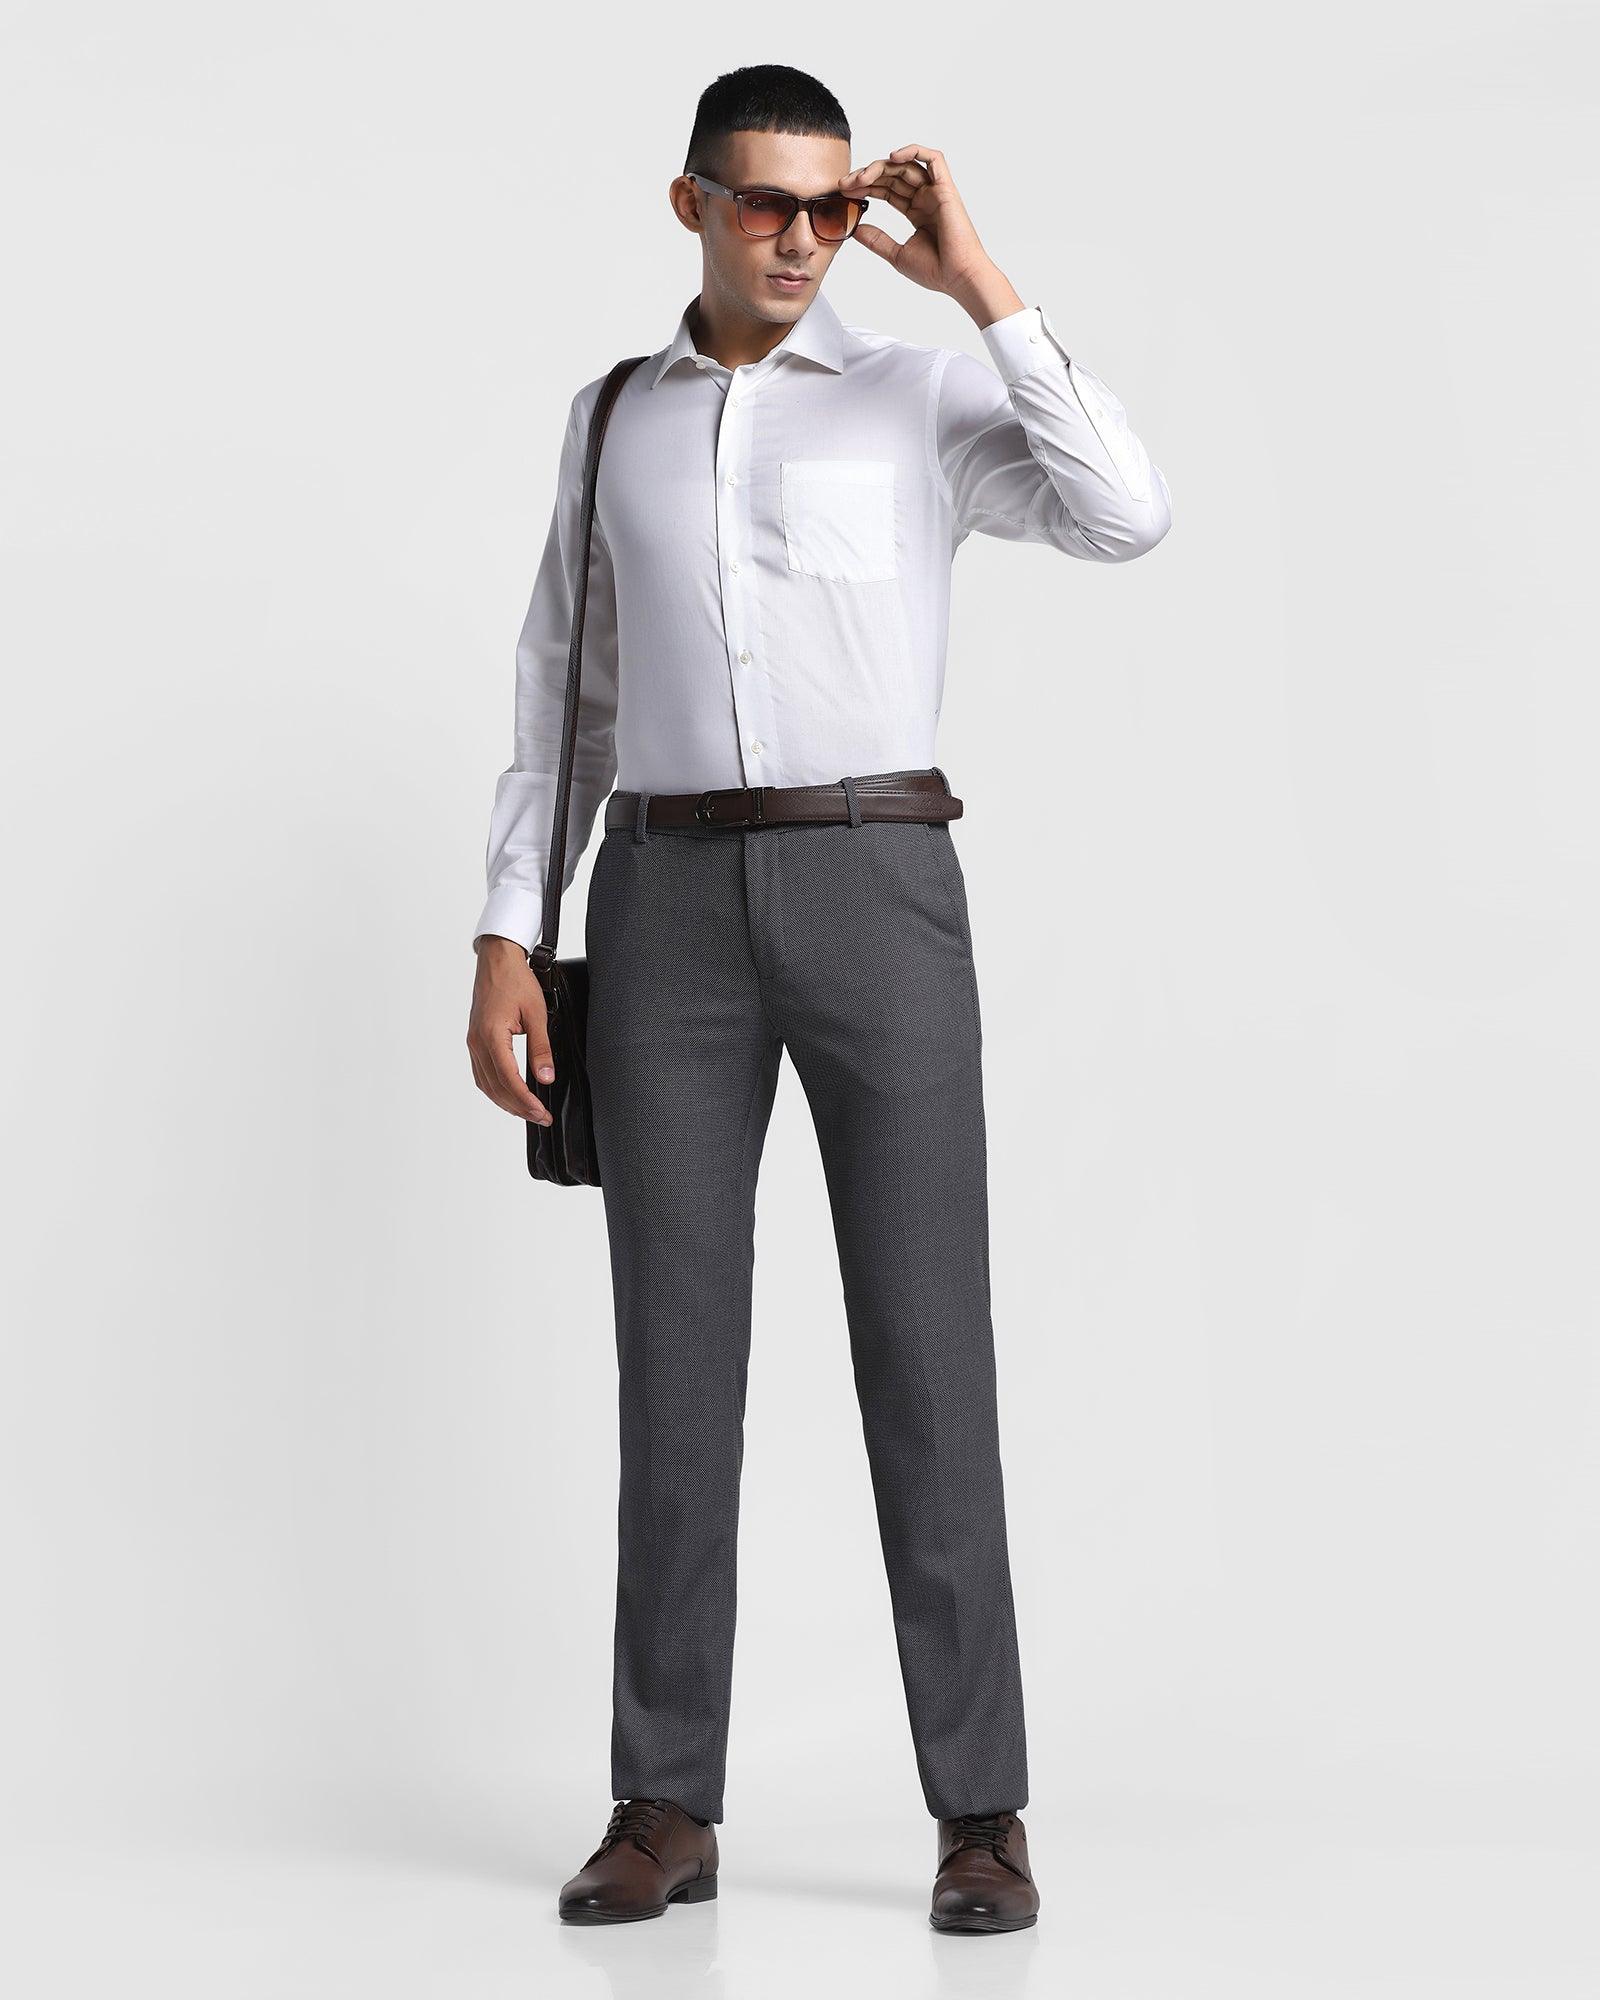 Textured Formal Trousers In Beige B95 Cairo